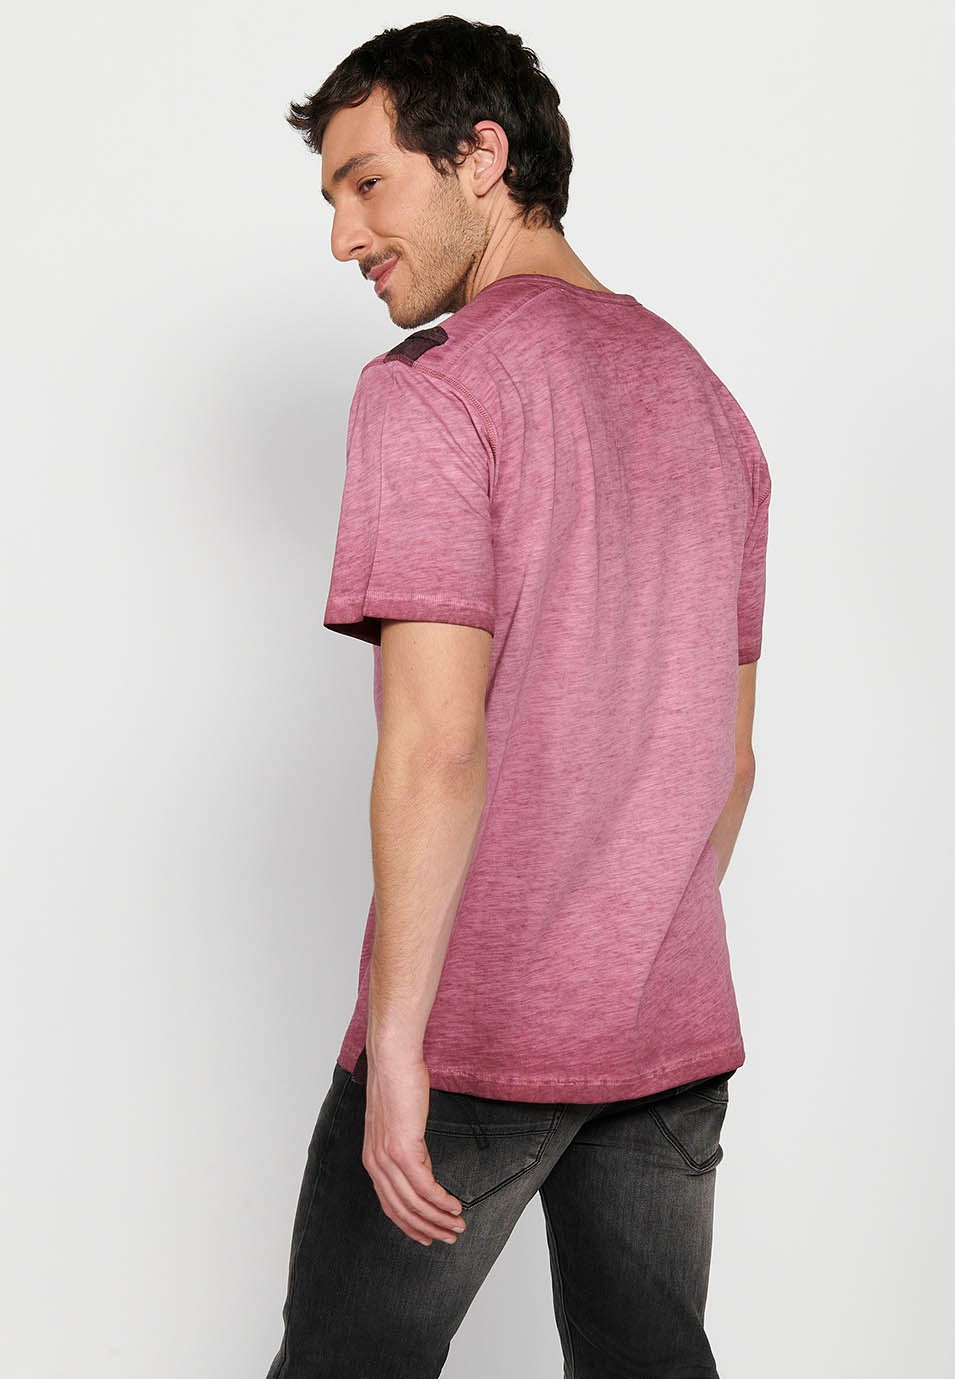 Men's Short Sleeve Cotton T-Shirt with Round Neck with Buttoned Opening and Maroon Color Front Detail 2